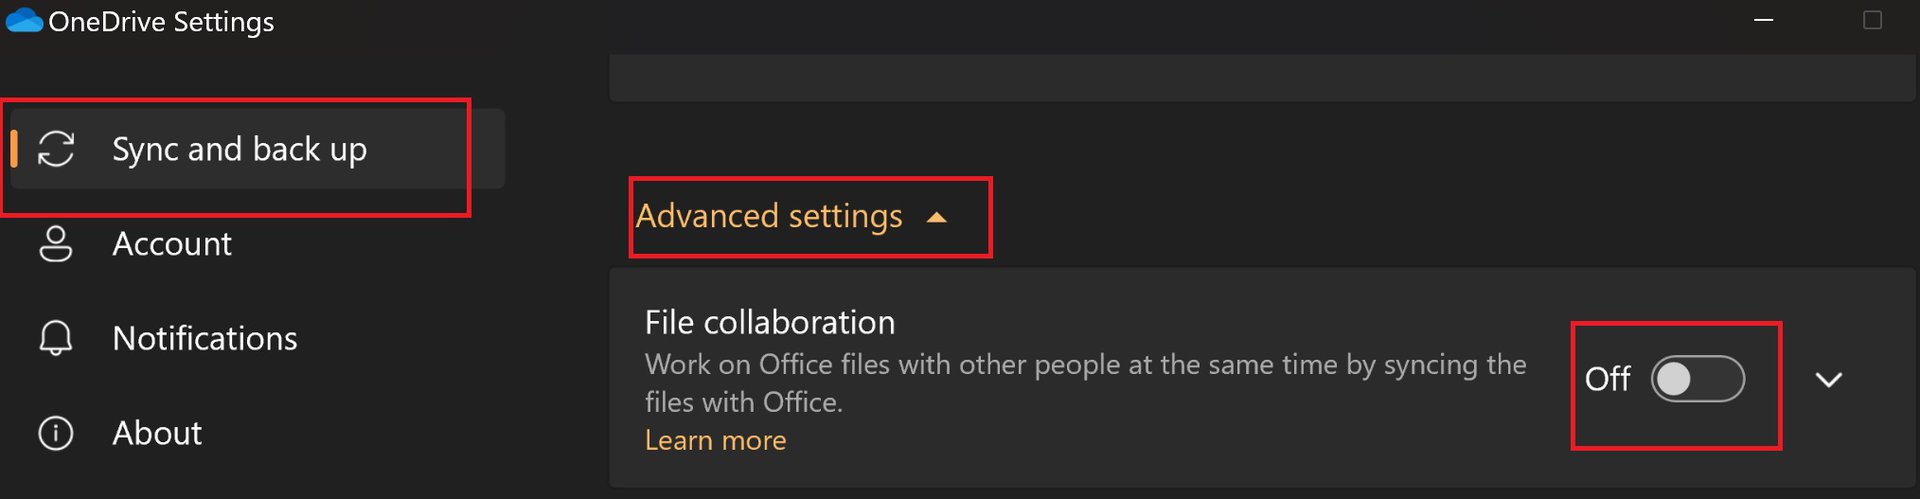 stop office apps from syncing on onedrive